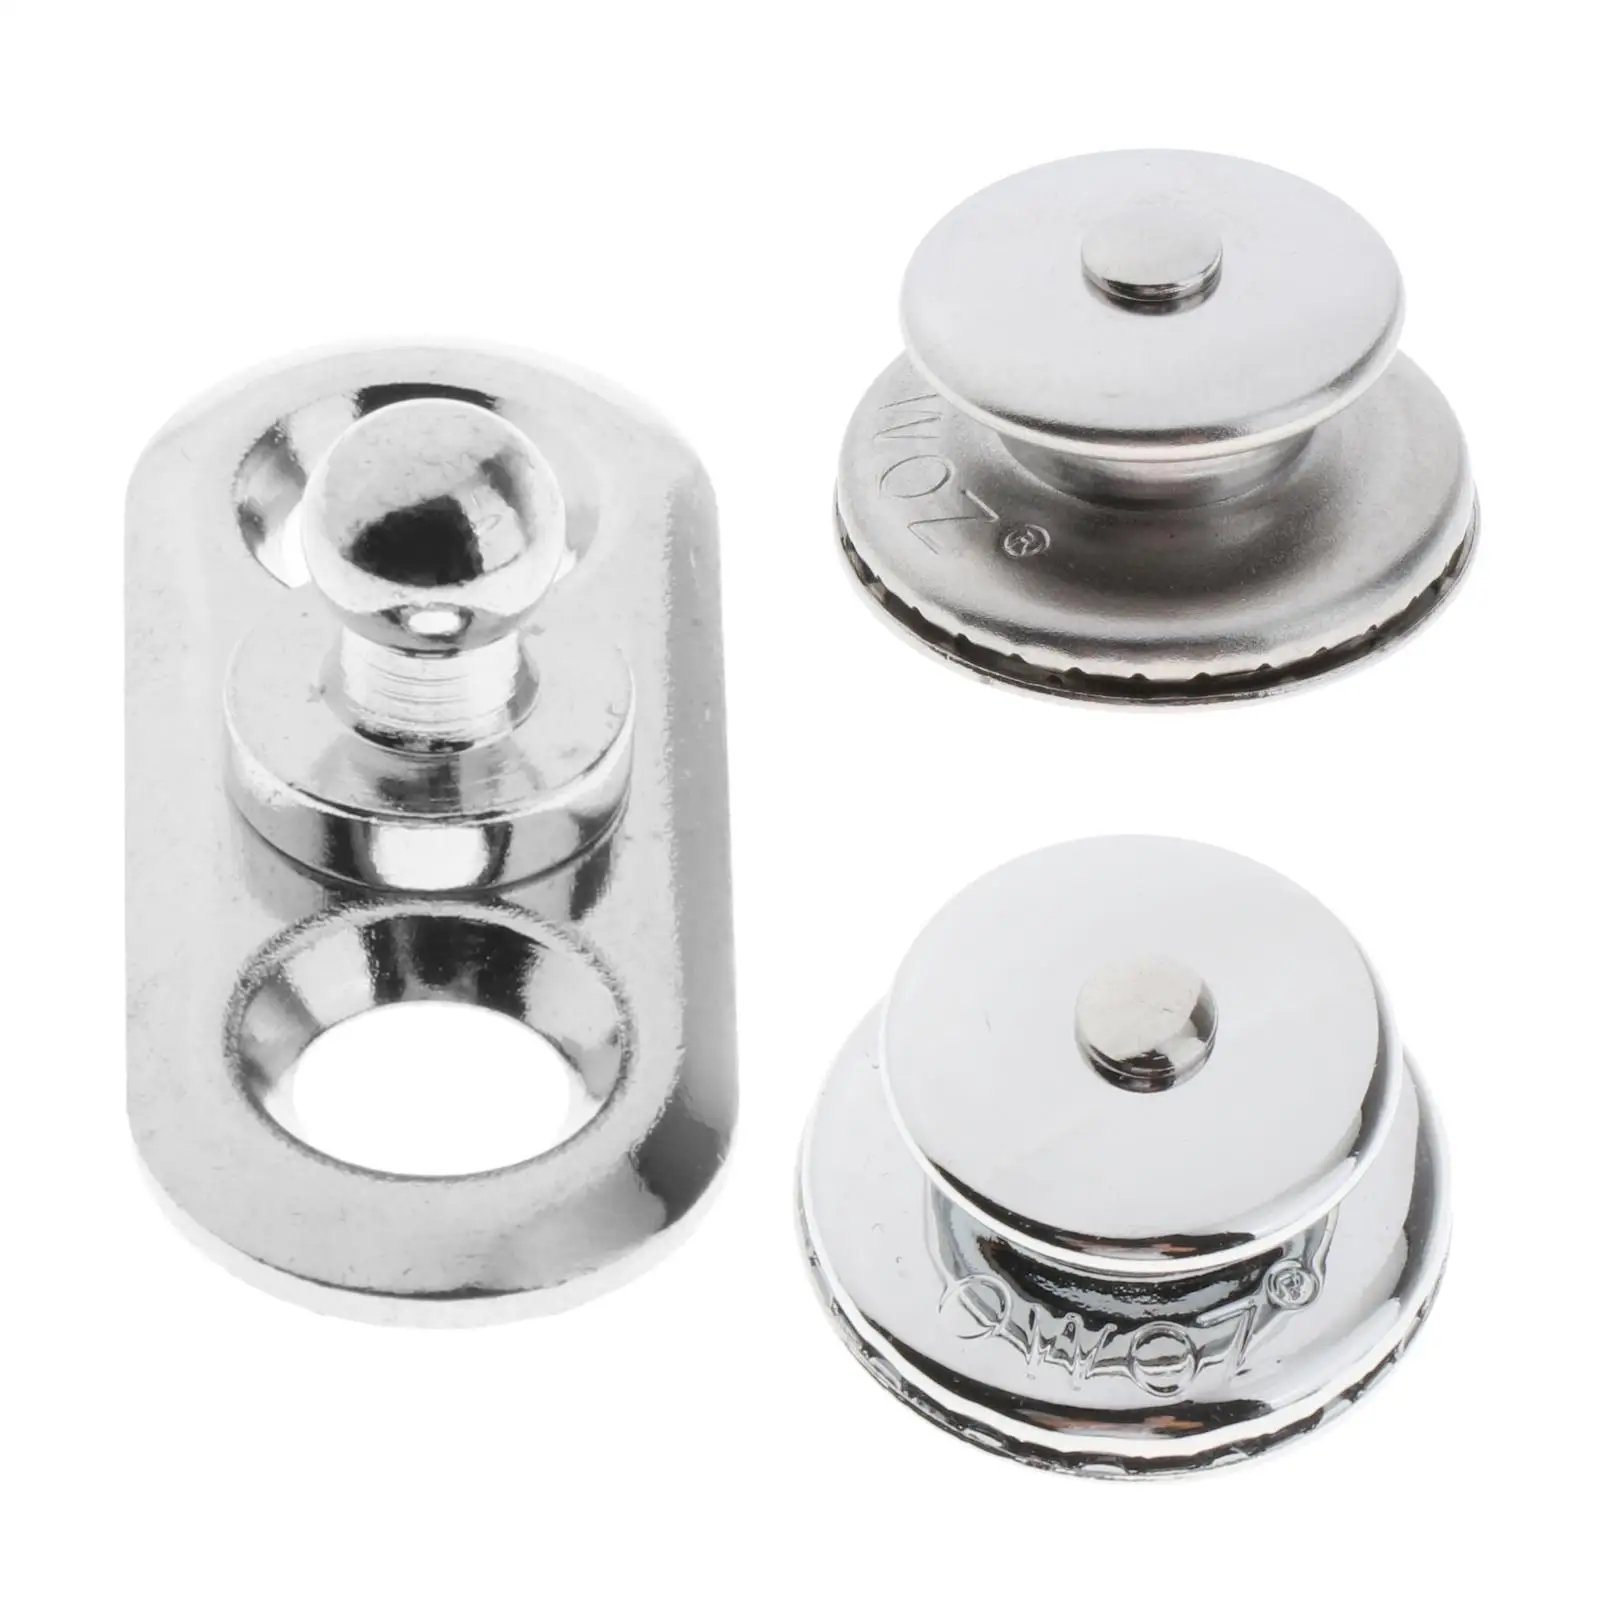 Screw Base Snaps Boat Accessory Replaces Silver Durable Practical